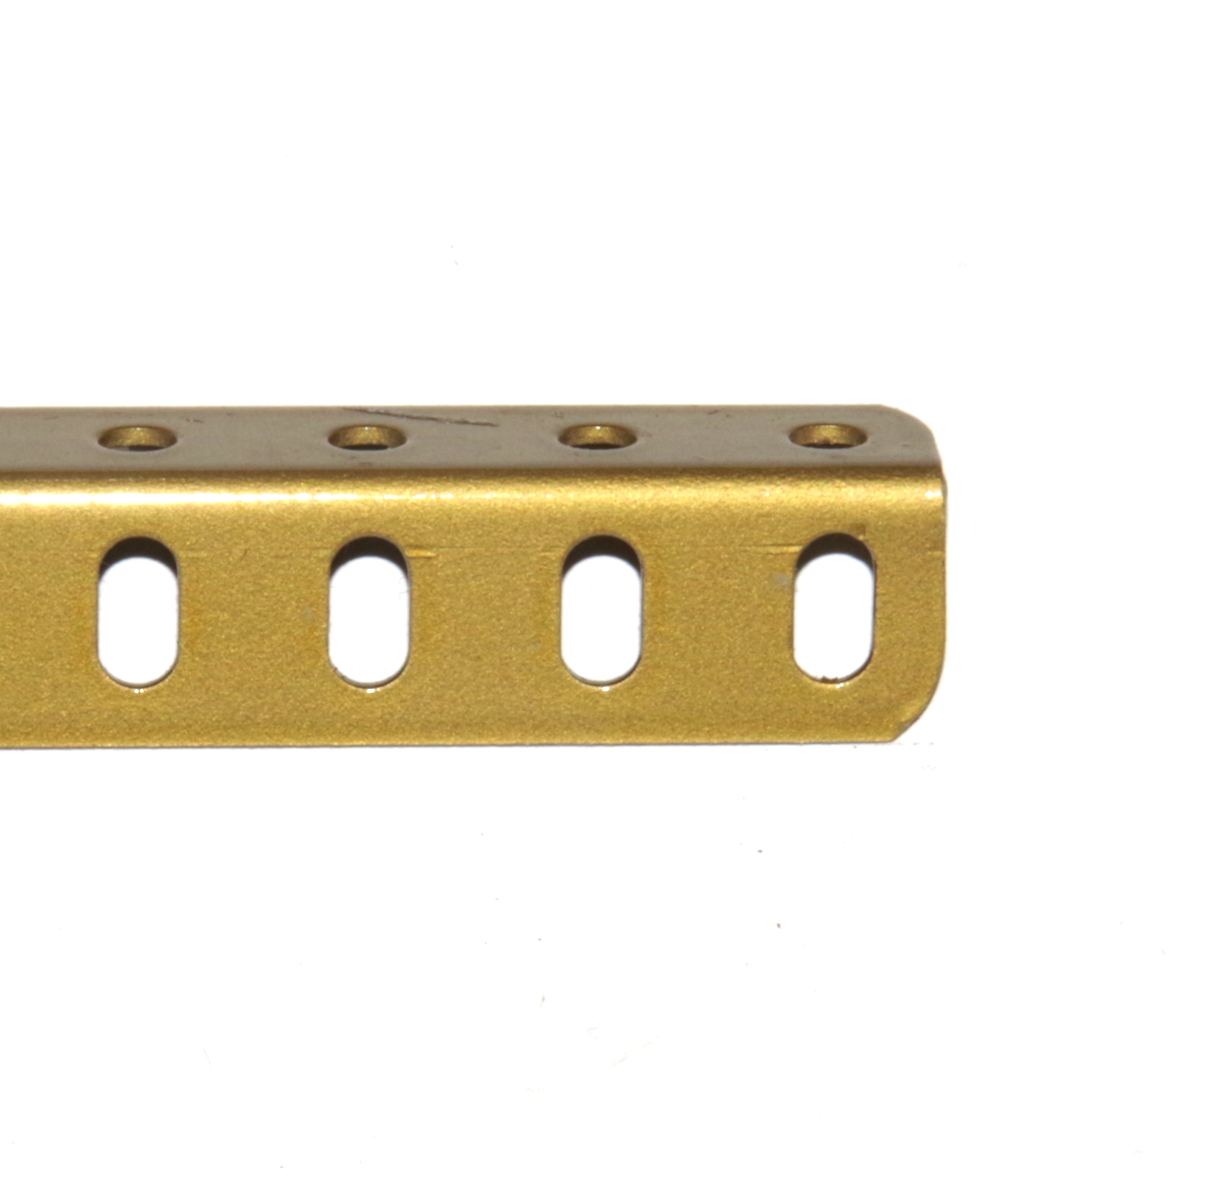 8 Angle Girder 25 Hole Gold Repainted